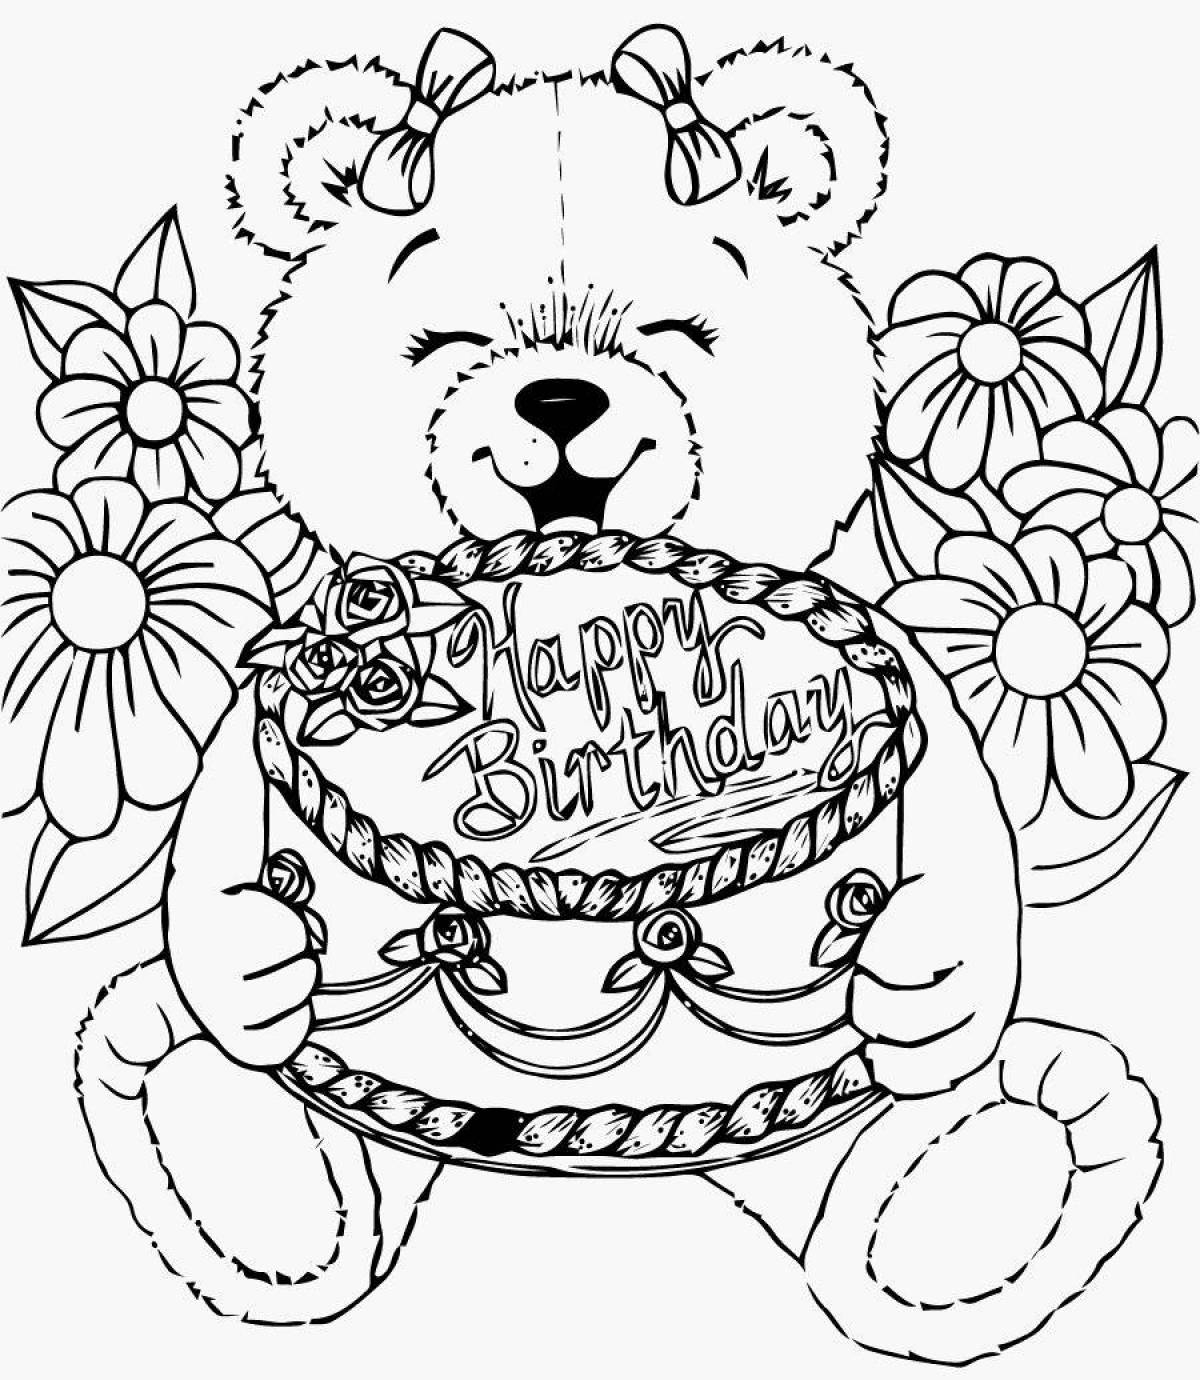 Coloring page nice mom happy birthday